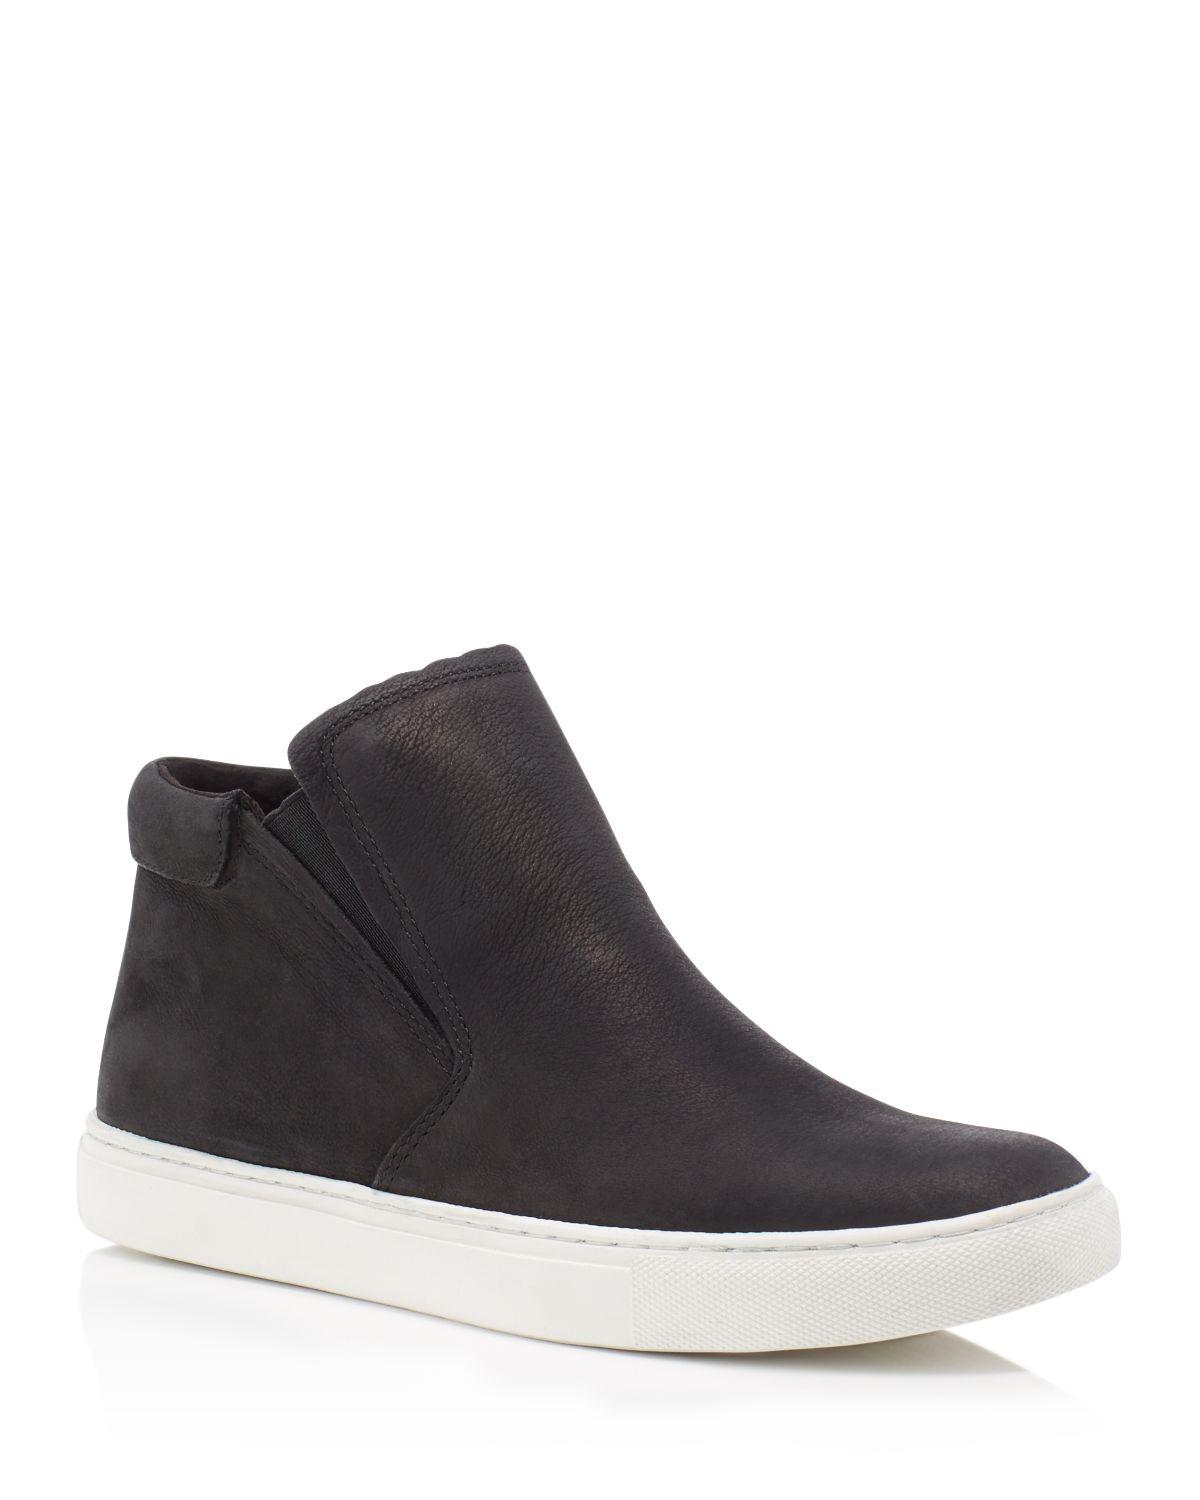 Kenneth cole Kalvin Nubuck Leather Slip On High Top Sneakers in Natural ...